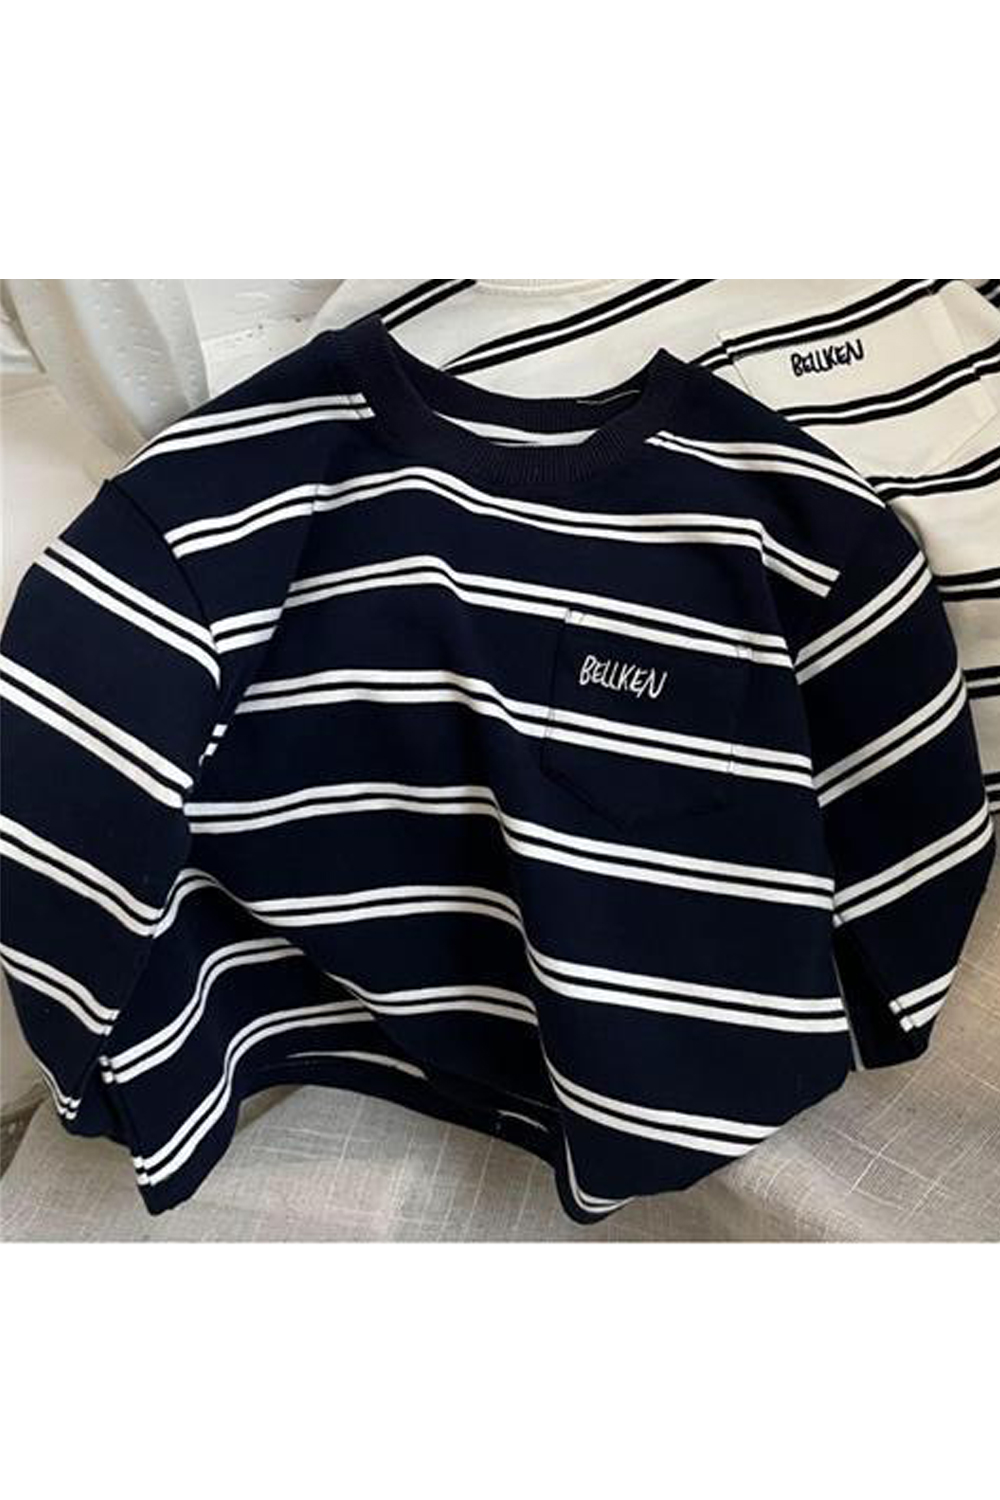 Selected Color is Blue Simple Striped Sweater YQ2210